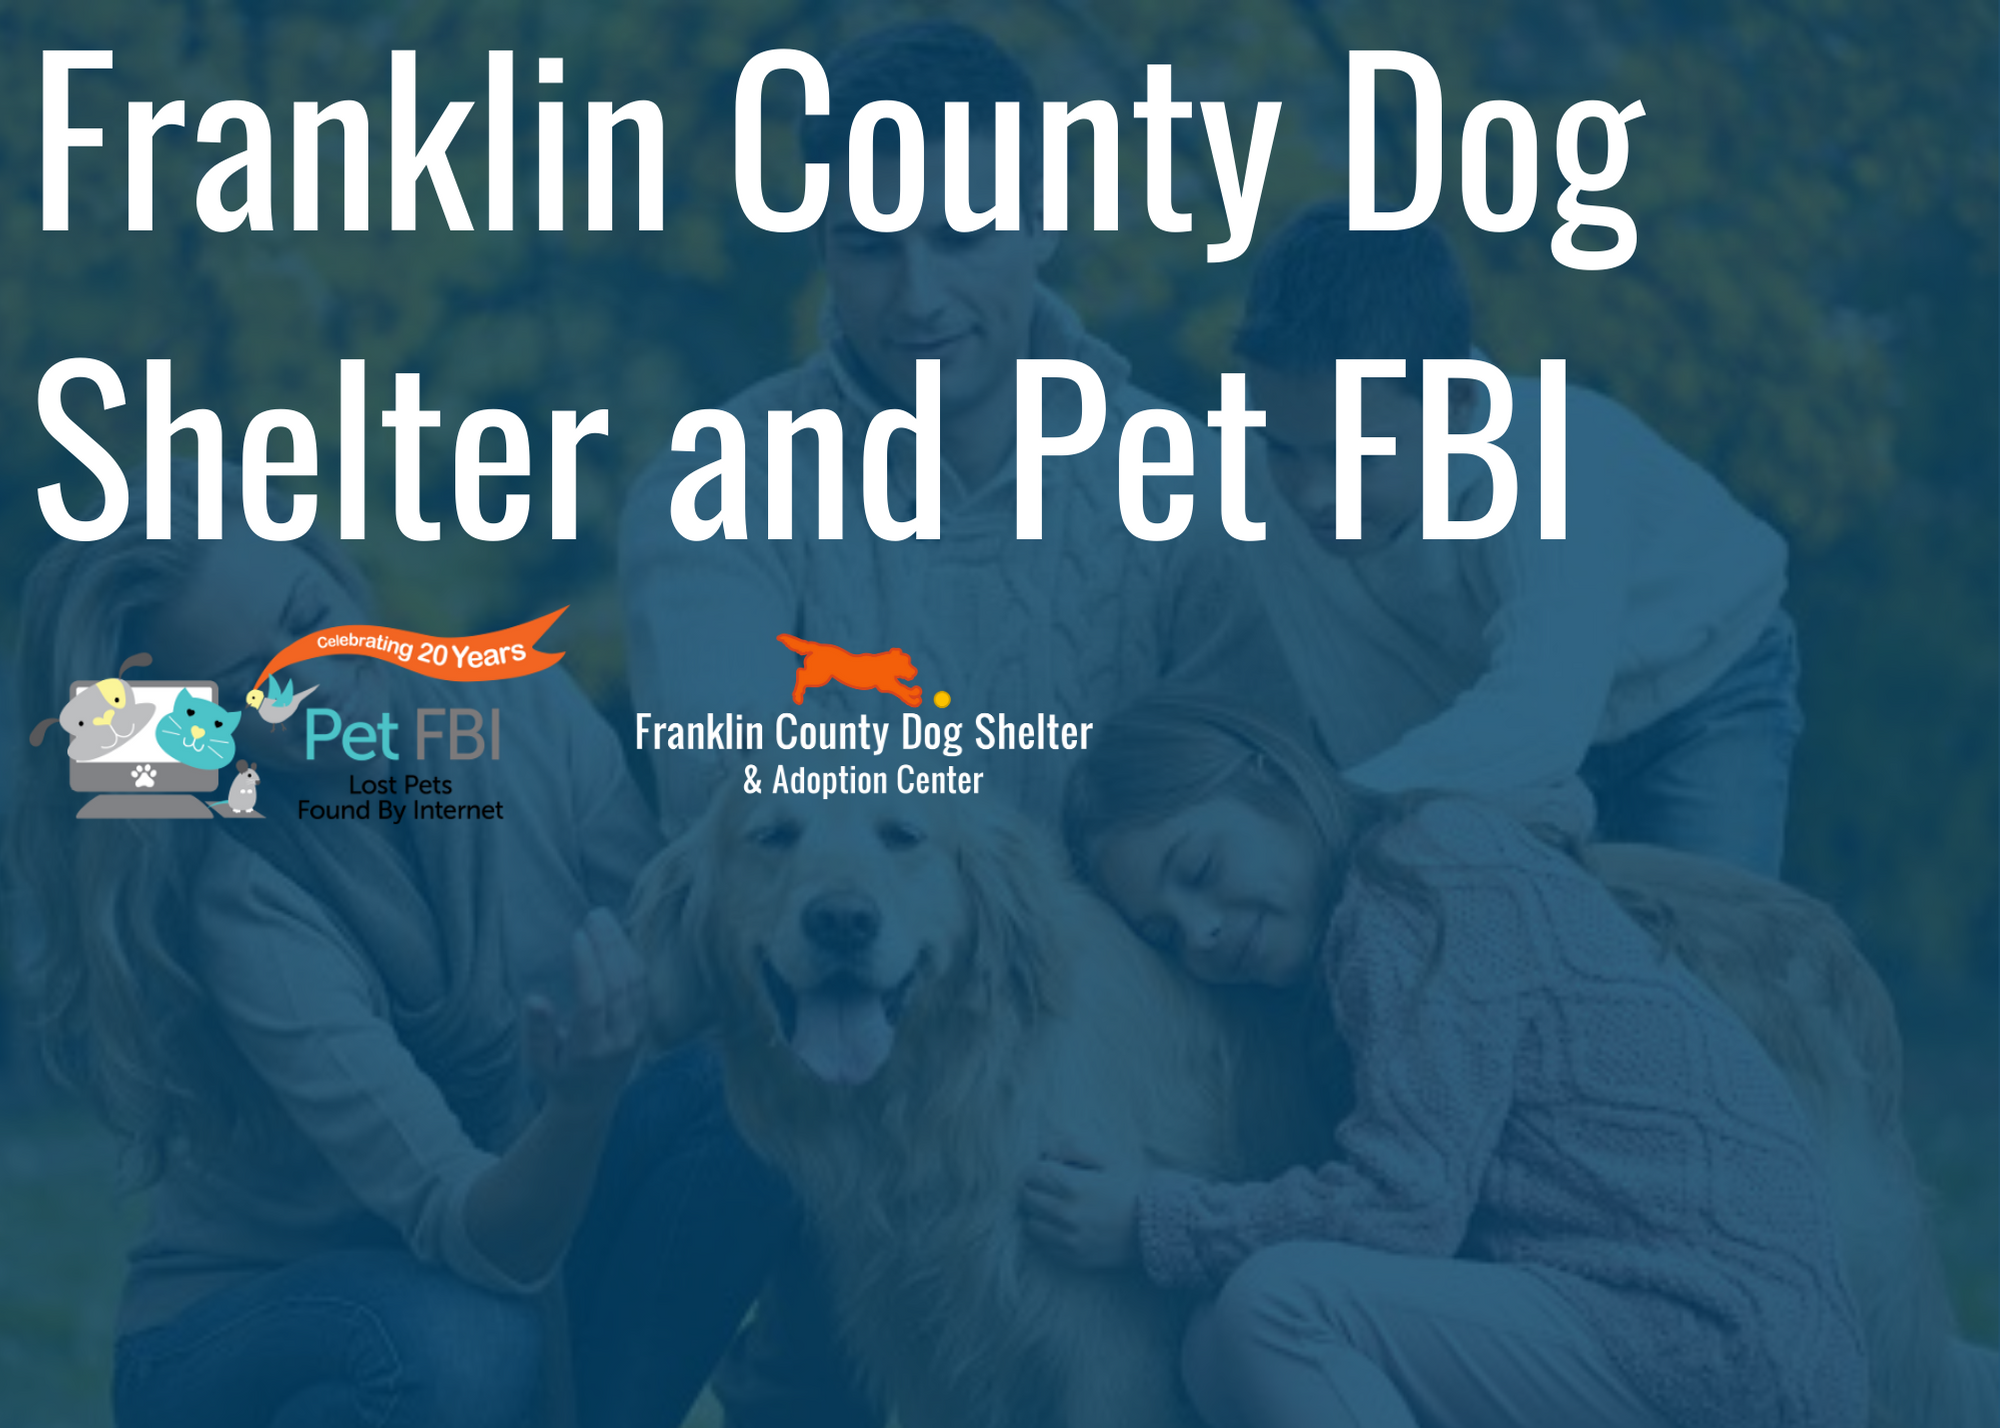 Franklin County Animal Care and Control - Home